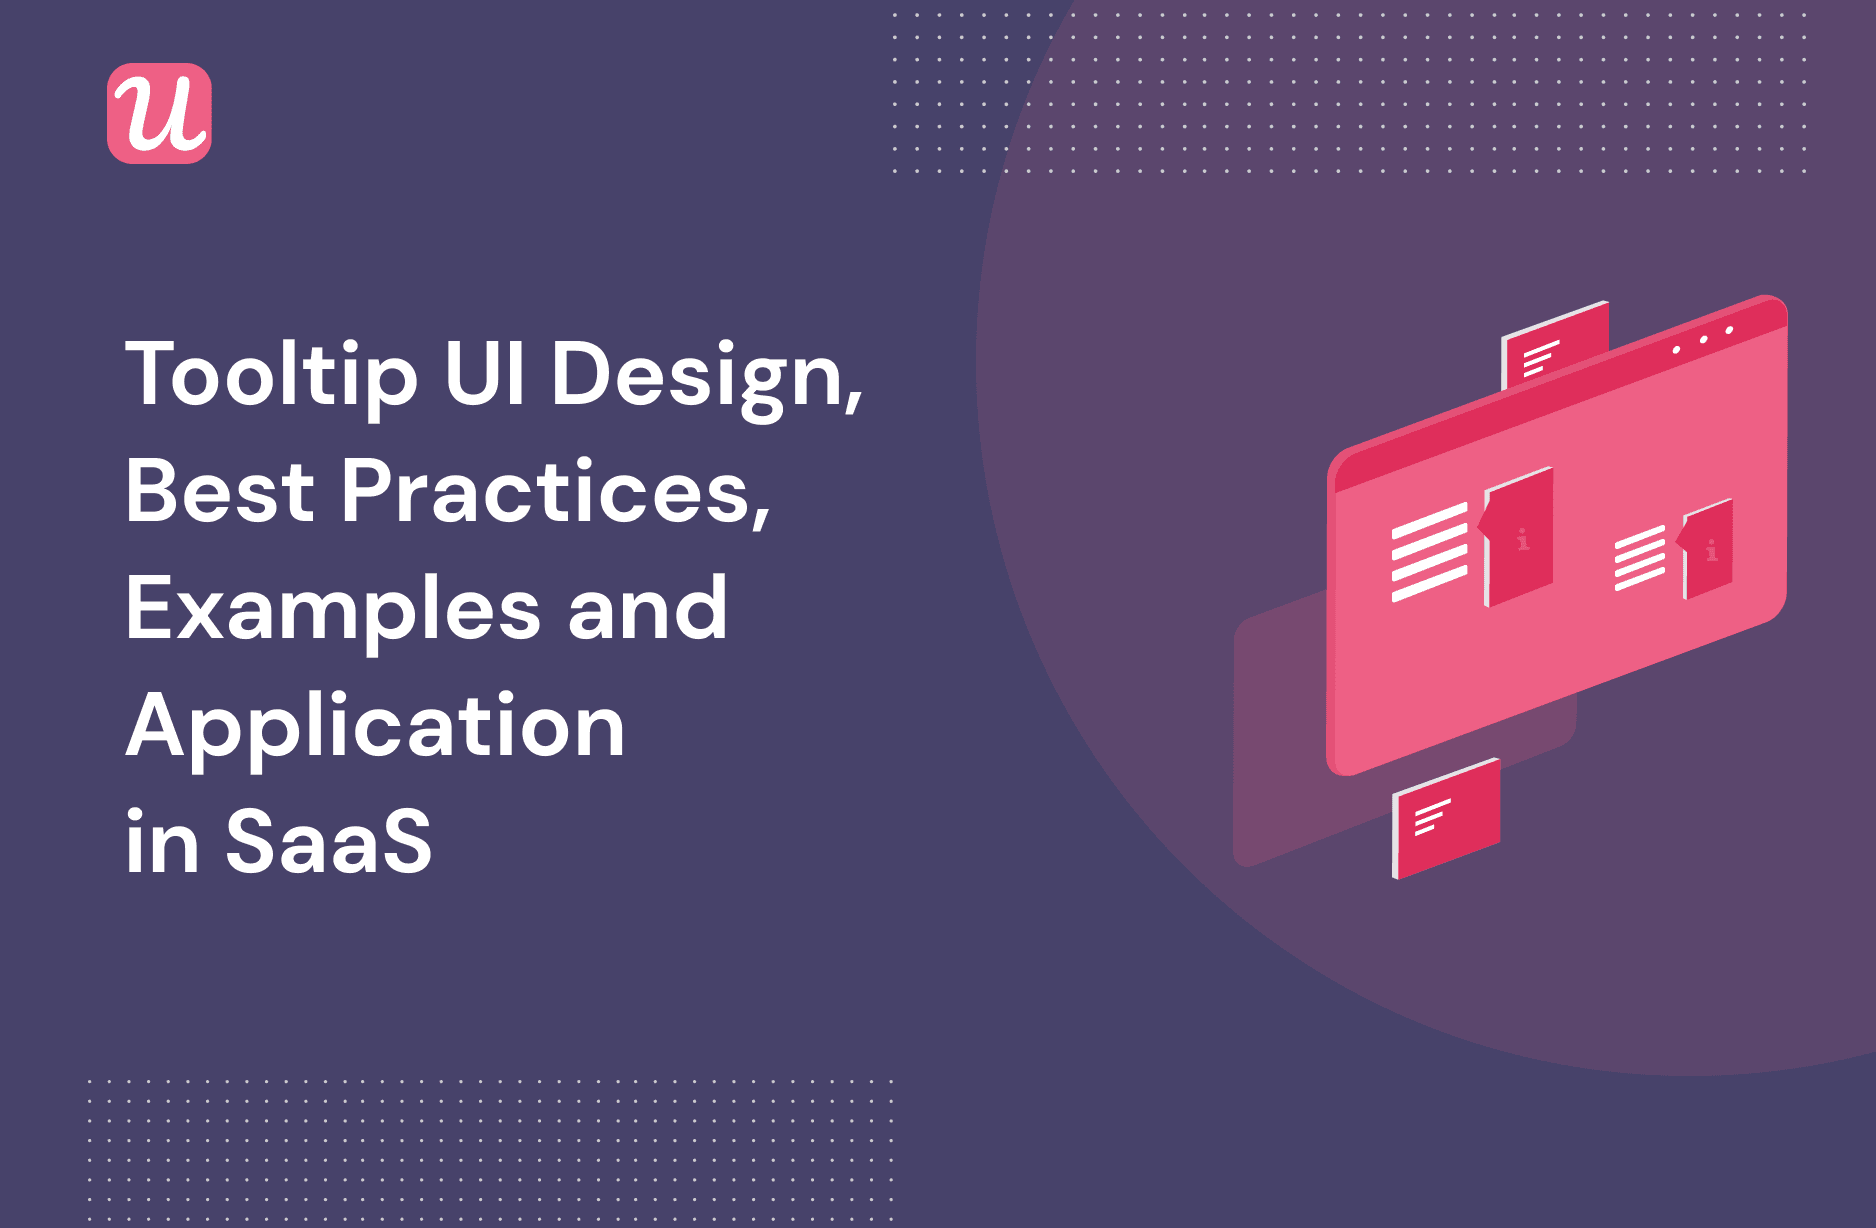 tooltip-ui-design-best-practices-examples-and-application-in-saas